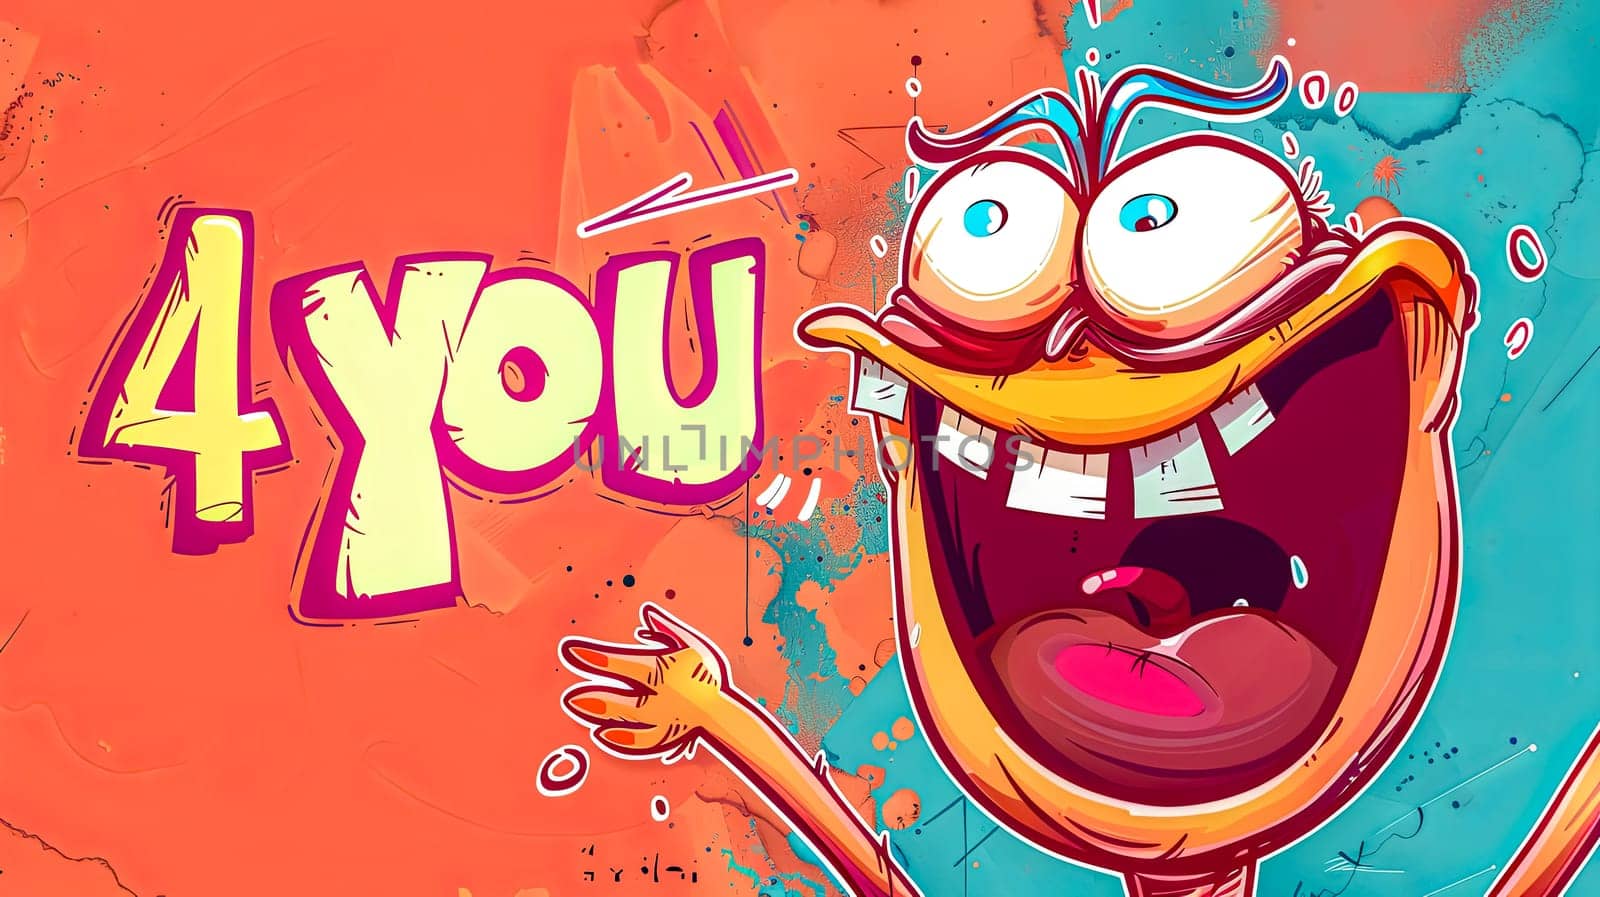 Colorful cartoon character shouting '4you' with a dynamic expression and abstract background by Edophoto